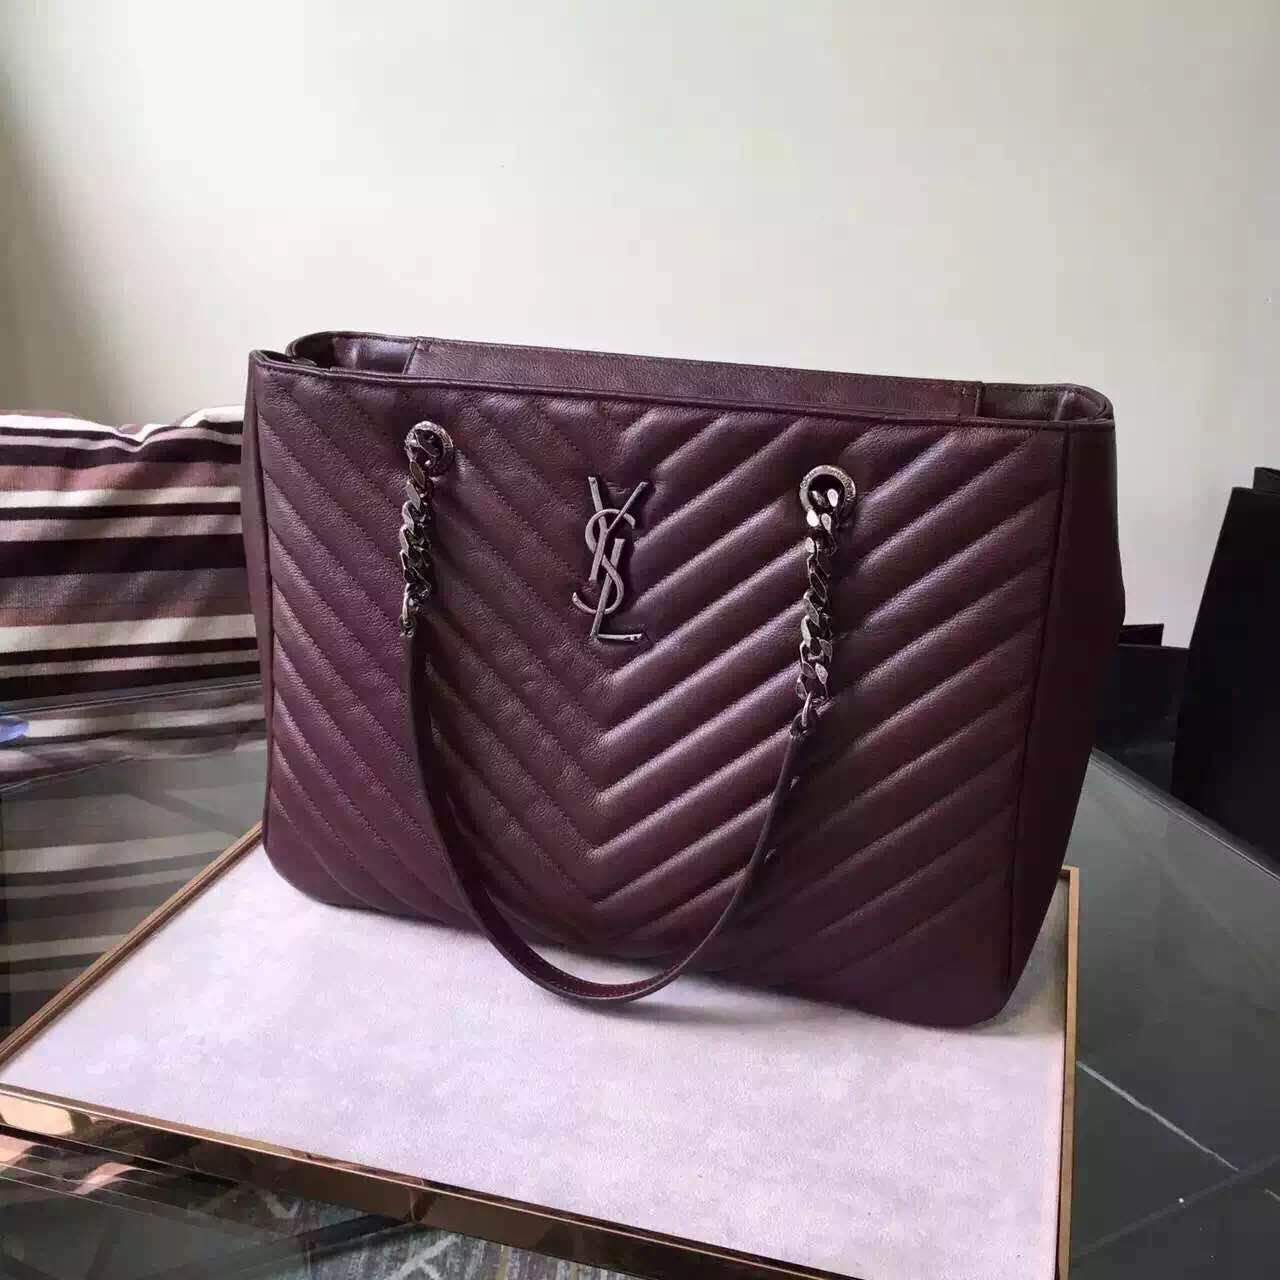 New Arrival!2016 Cheap YSL Out Sale with Free Shipping-Saint Laurent Classic Monogram Shopping Bag in Bordeaux MATELASSÉ Leather